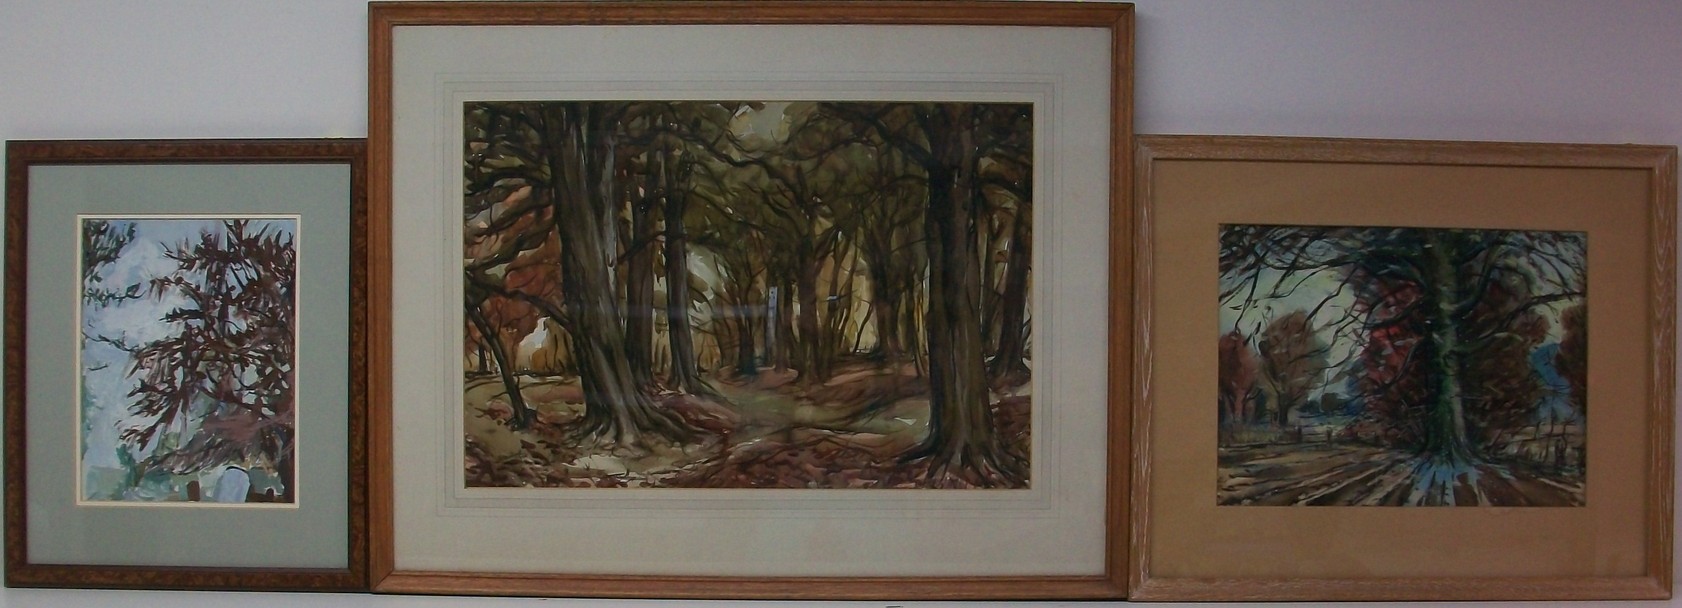 Hugo Caswell (c. 1948): watercolour and gouache paintings depicting woods by Dryden House, Oundle